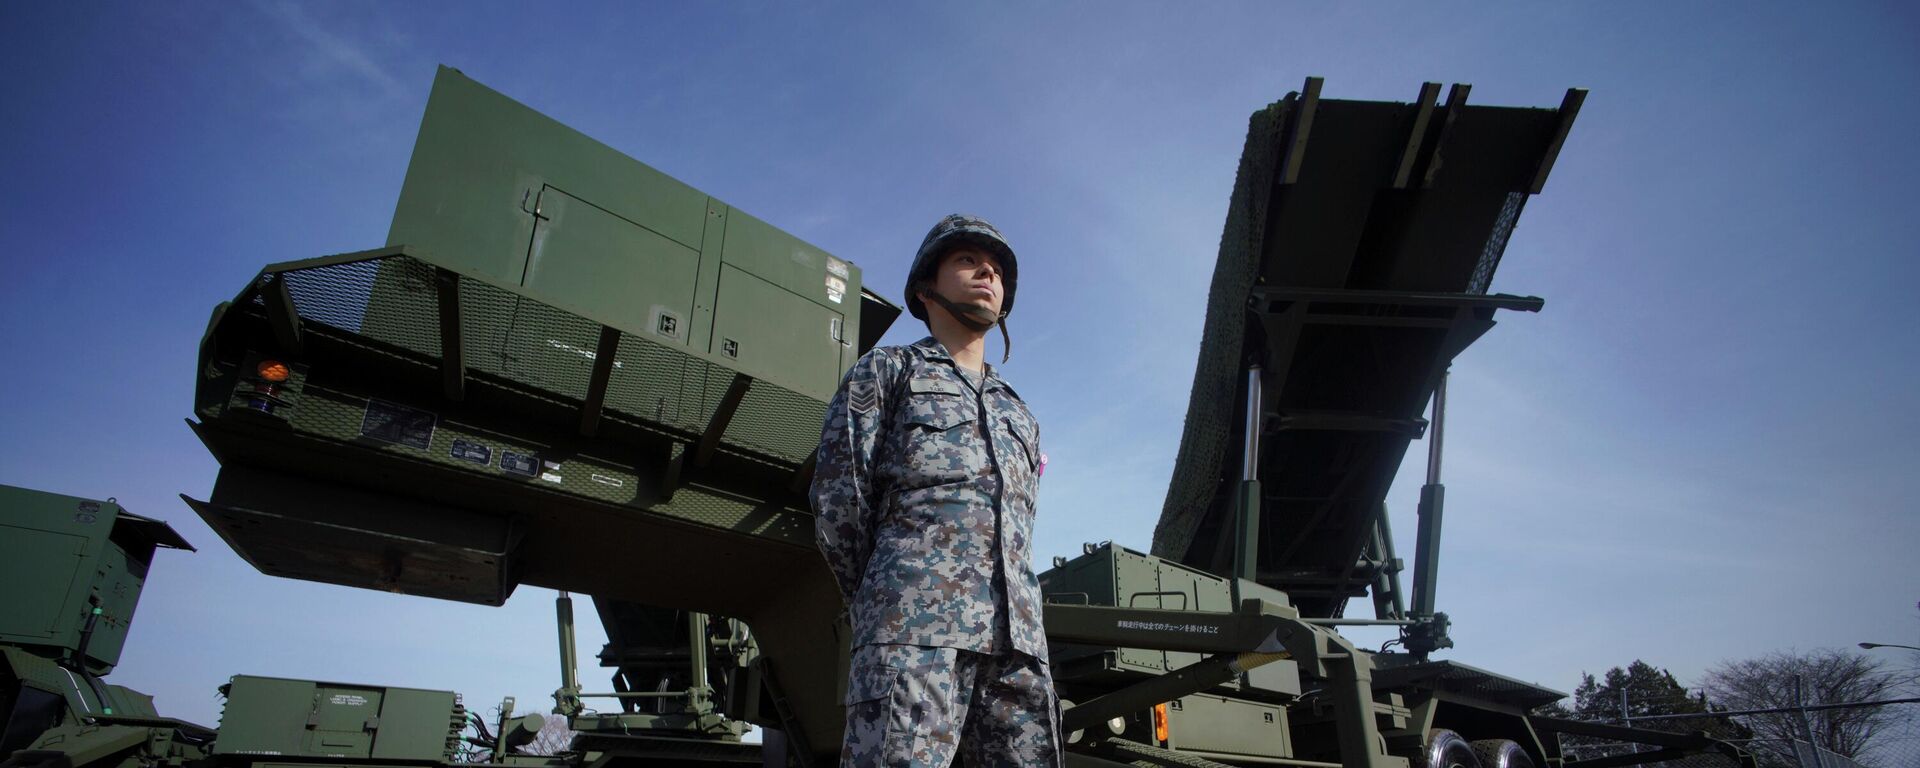 In this Jan. 18, 2018, file photo, a member of the Japan Ground Self-Defense Force stands guard next to a surface-to-air Patriot Advanced Capability-3 (PAC-3) missile interceptor launcher vehicle at Narashino Exercise Area in Funabashi, east of Tokyo.  - Sputnik International, 1920, 02.09.2022